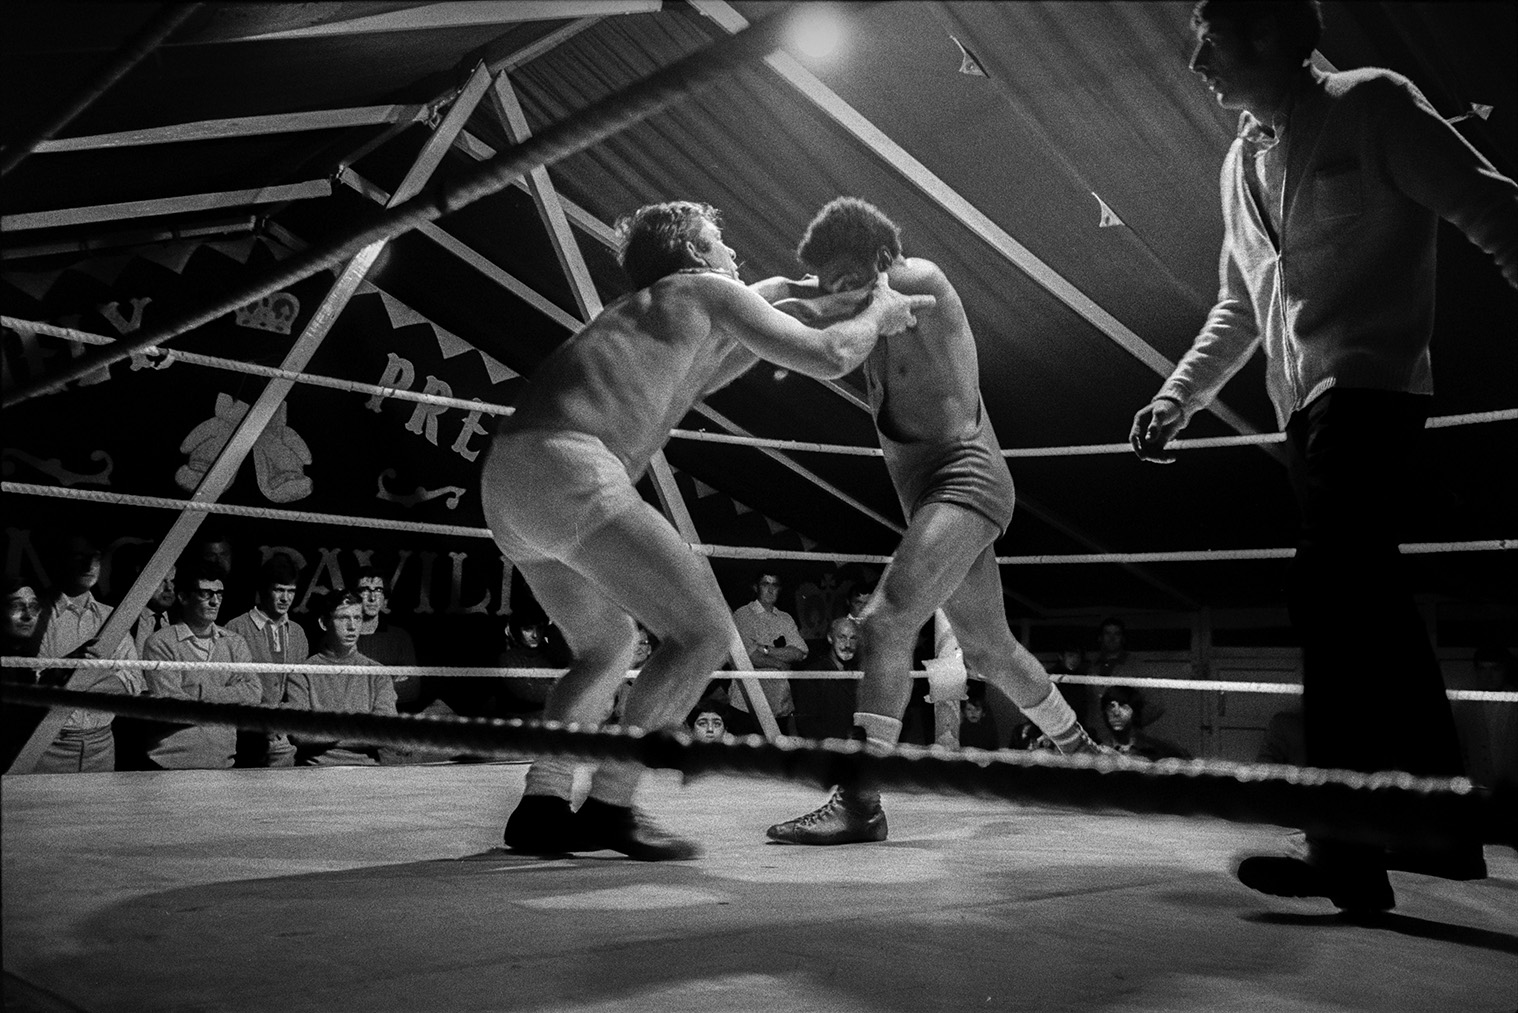 A wrestling match in a tent at Barnstaple Fair. Spectators are watching around the ring and the referee is supervising the match.